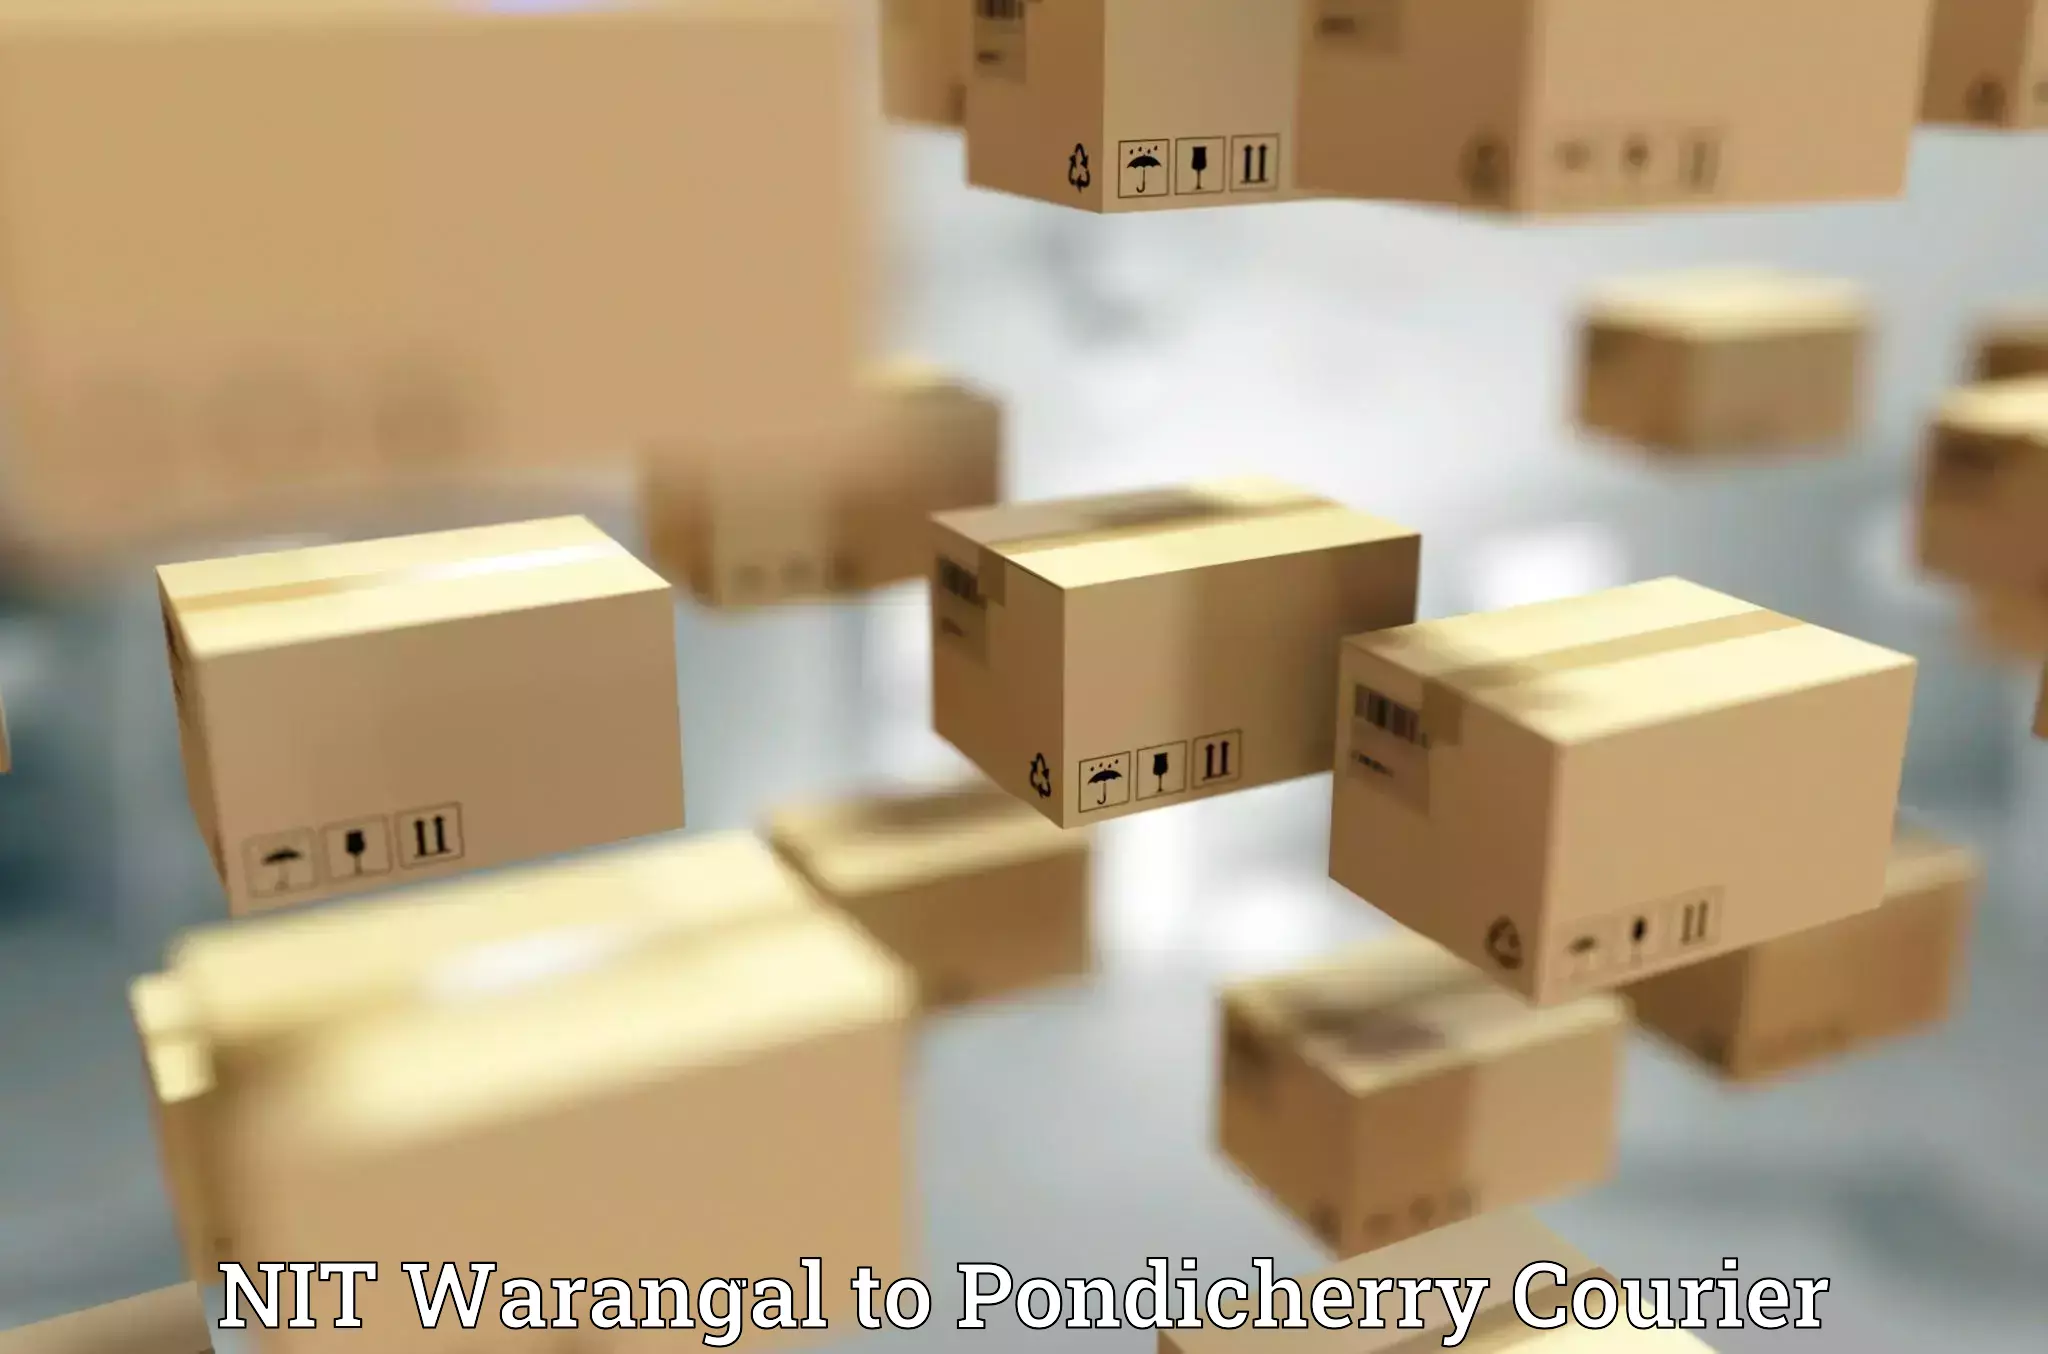 Global shipping solutions in NIT Warangal to Pondicherry